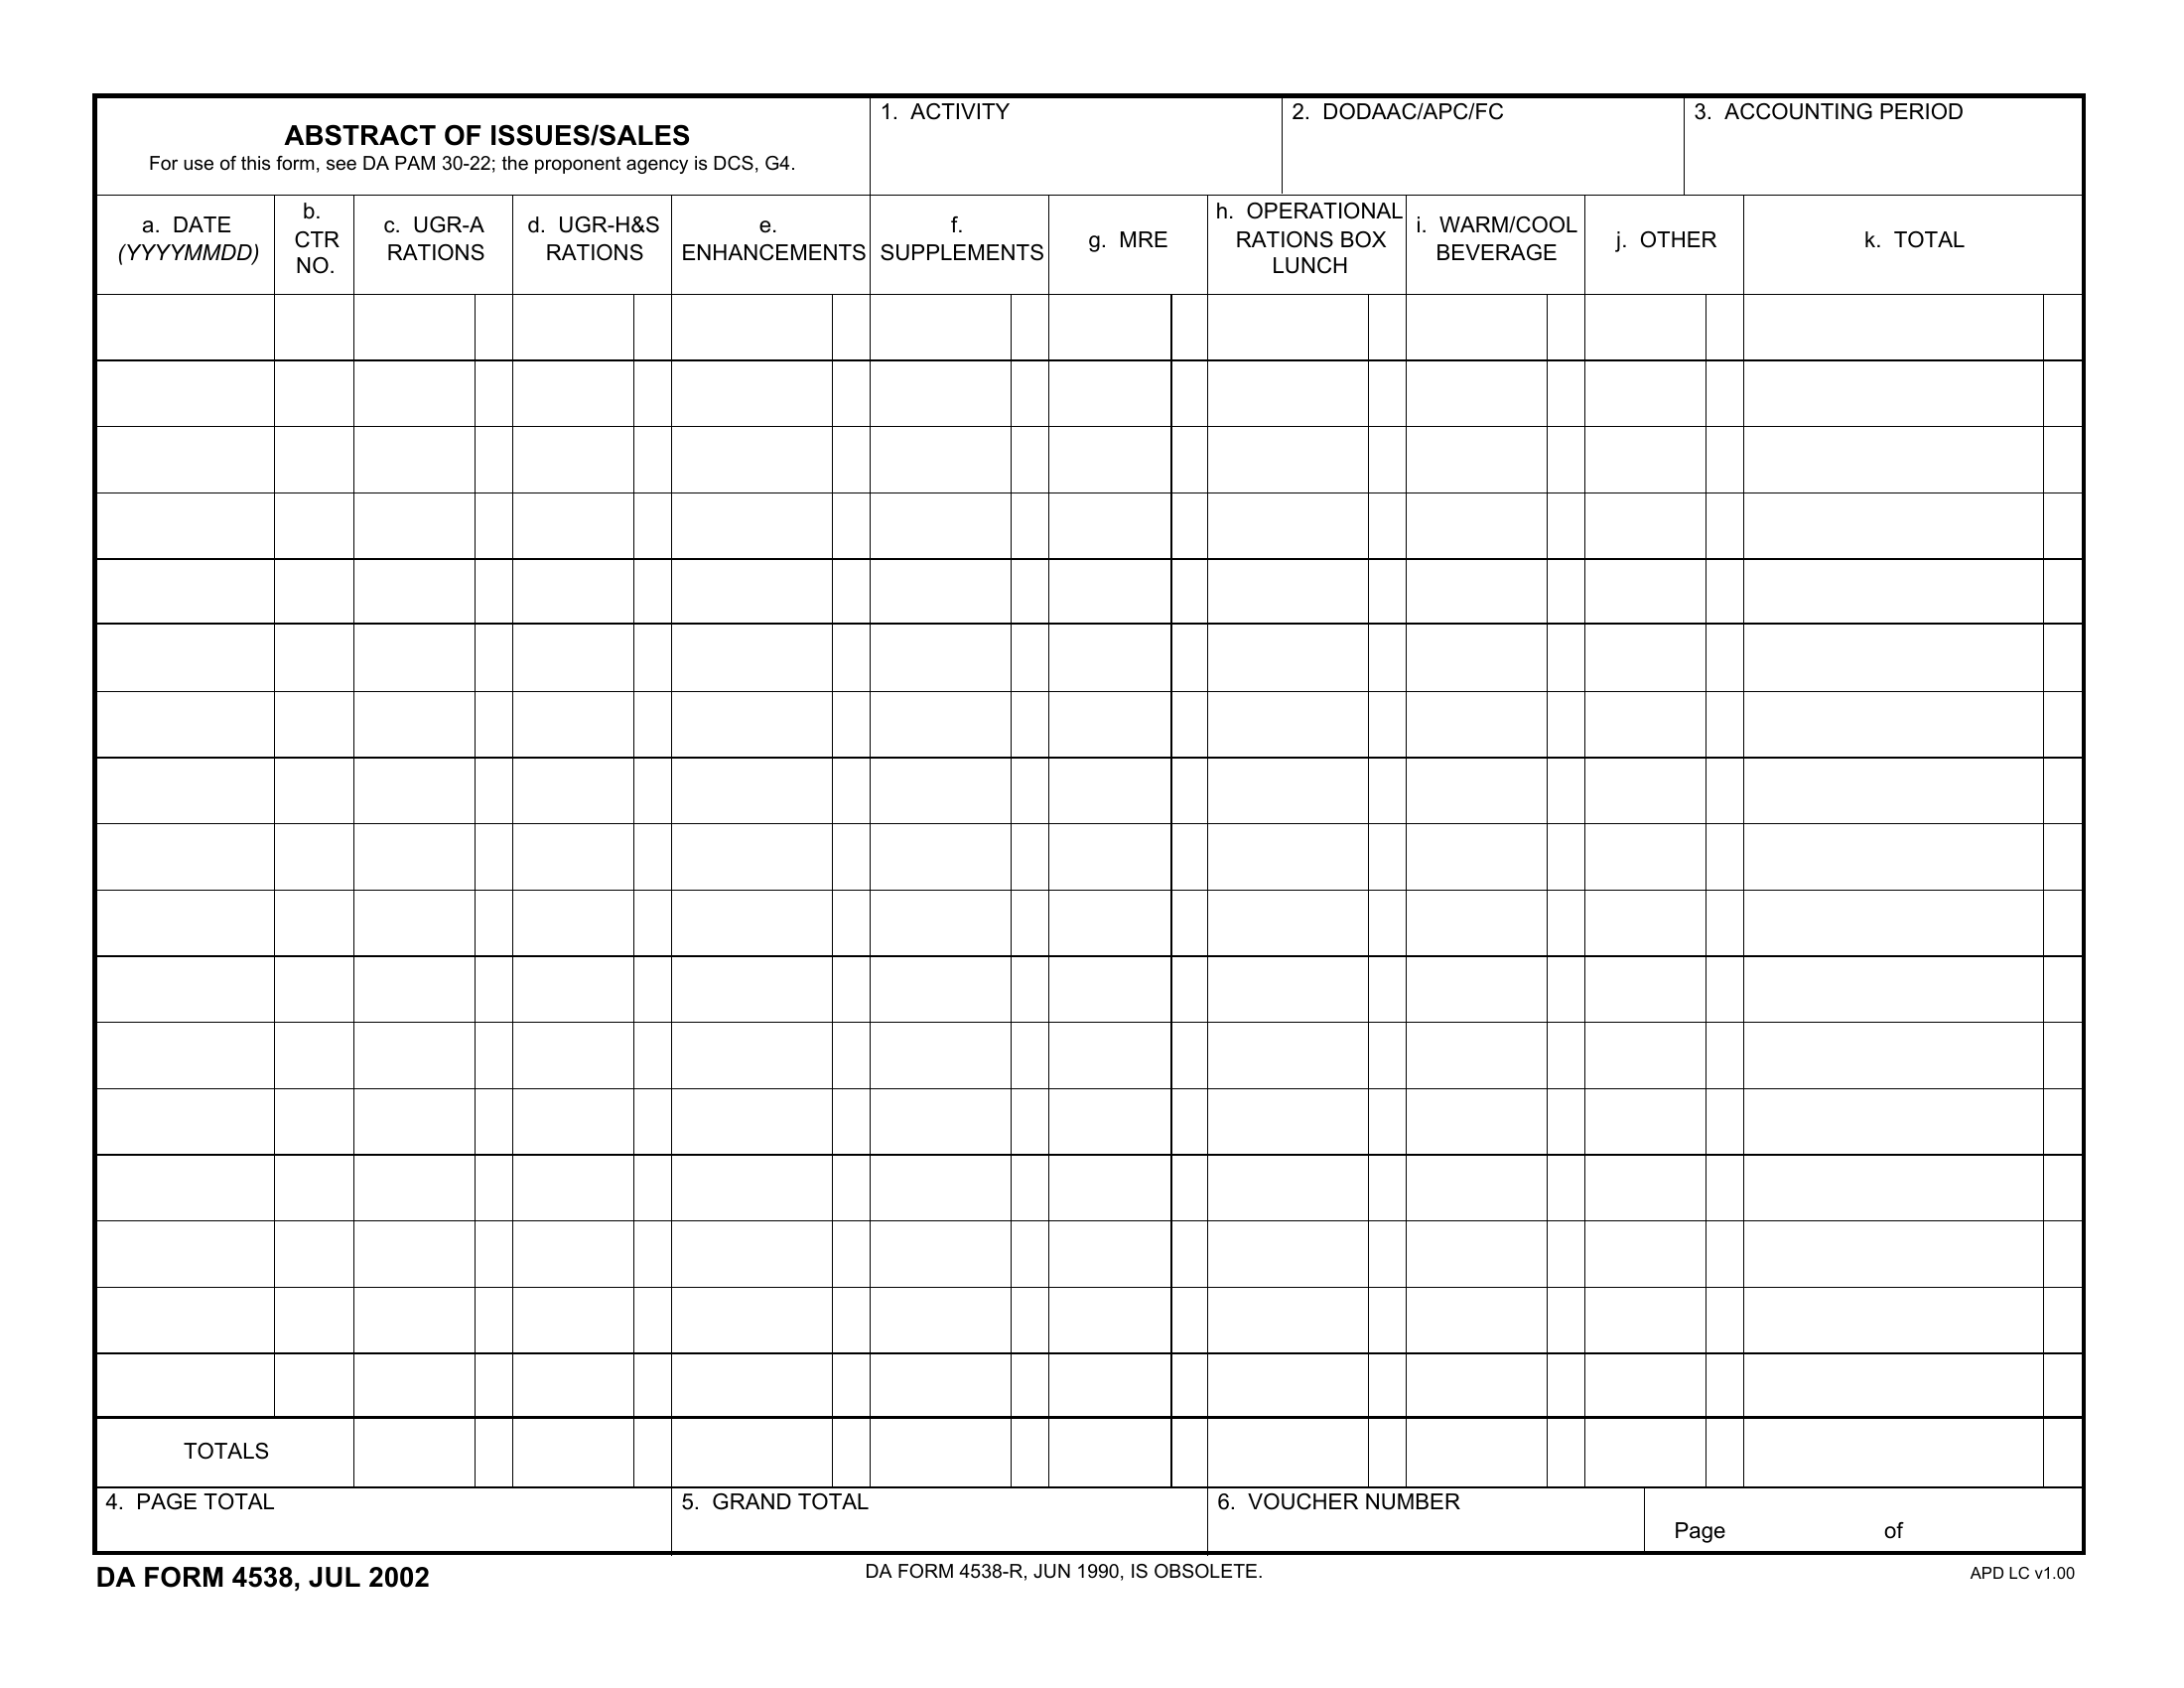 da-form-4538-abstract-of-issues-sales-forms-docs-2023